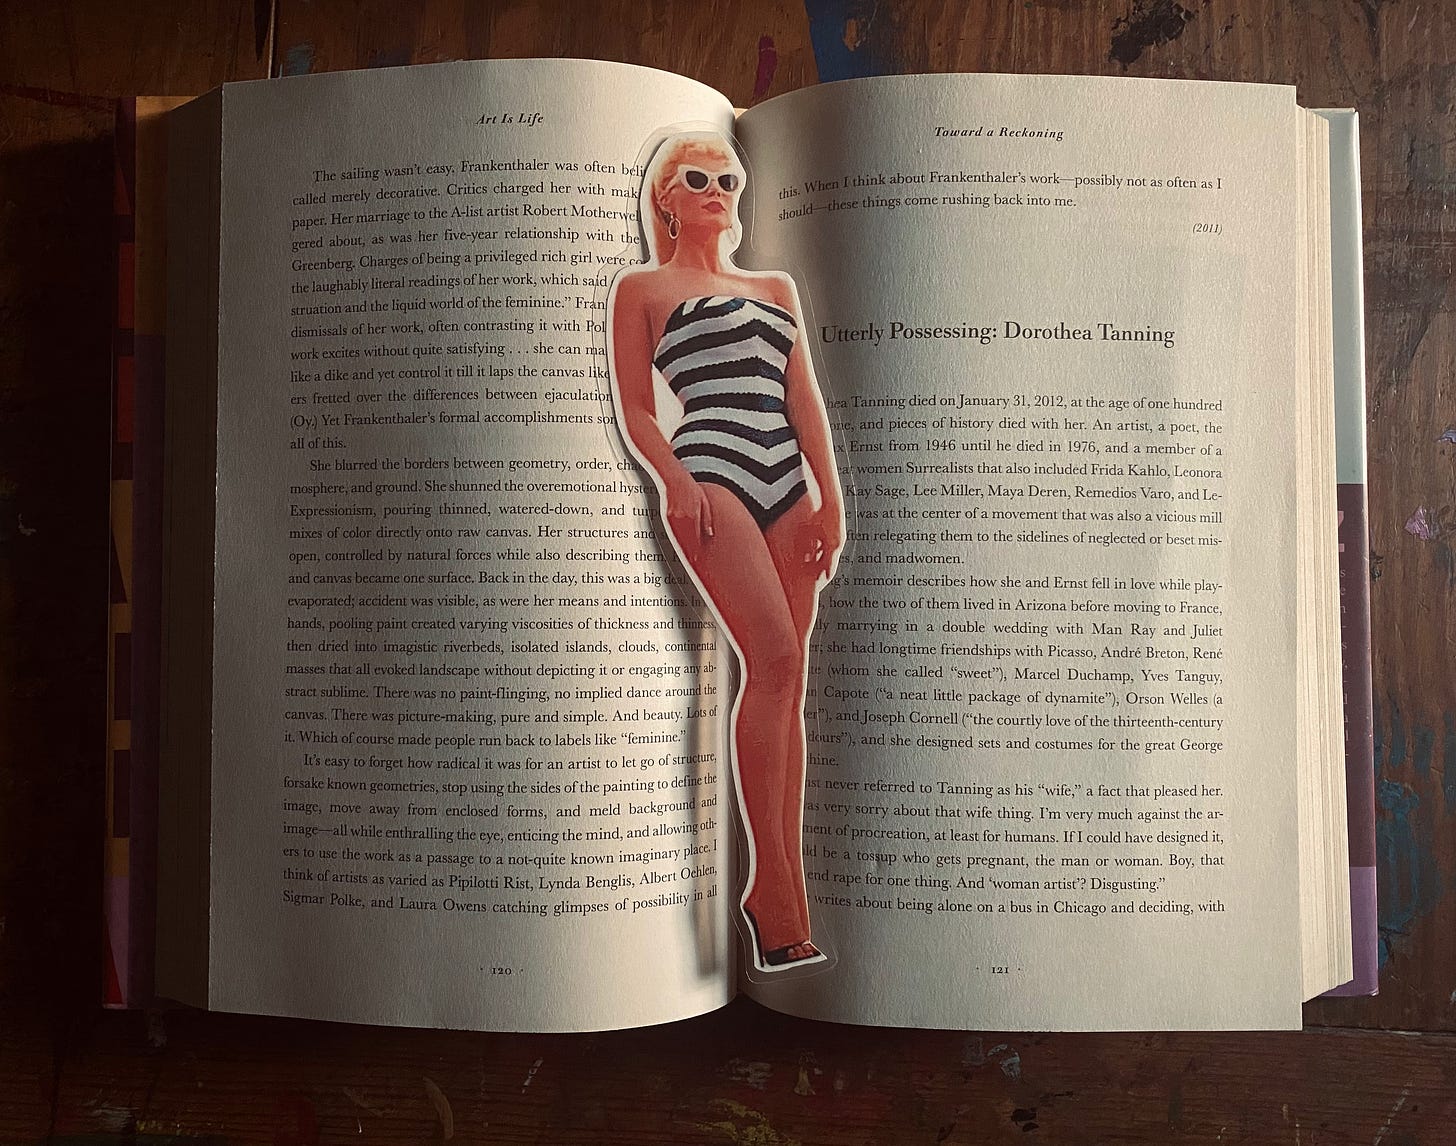 A cutout of Barbie from The Barbie Movie inside the book Art Is Life by Jerry Saltz.